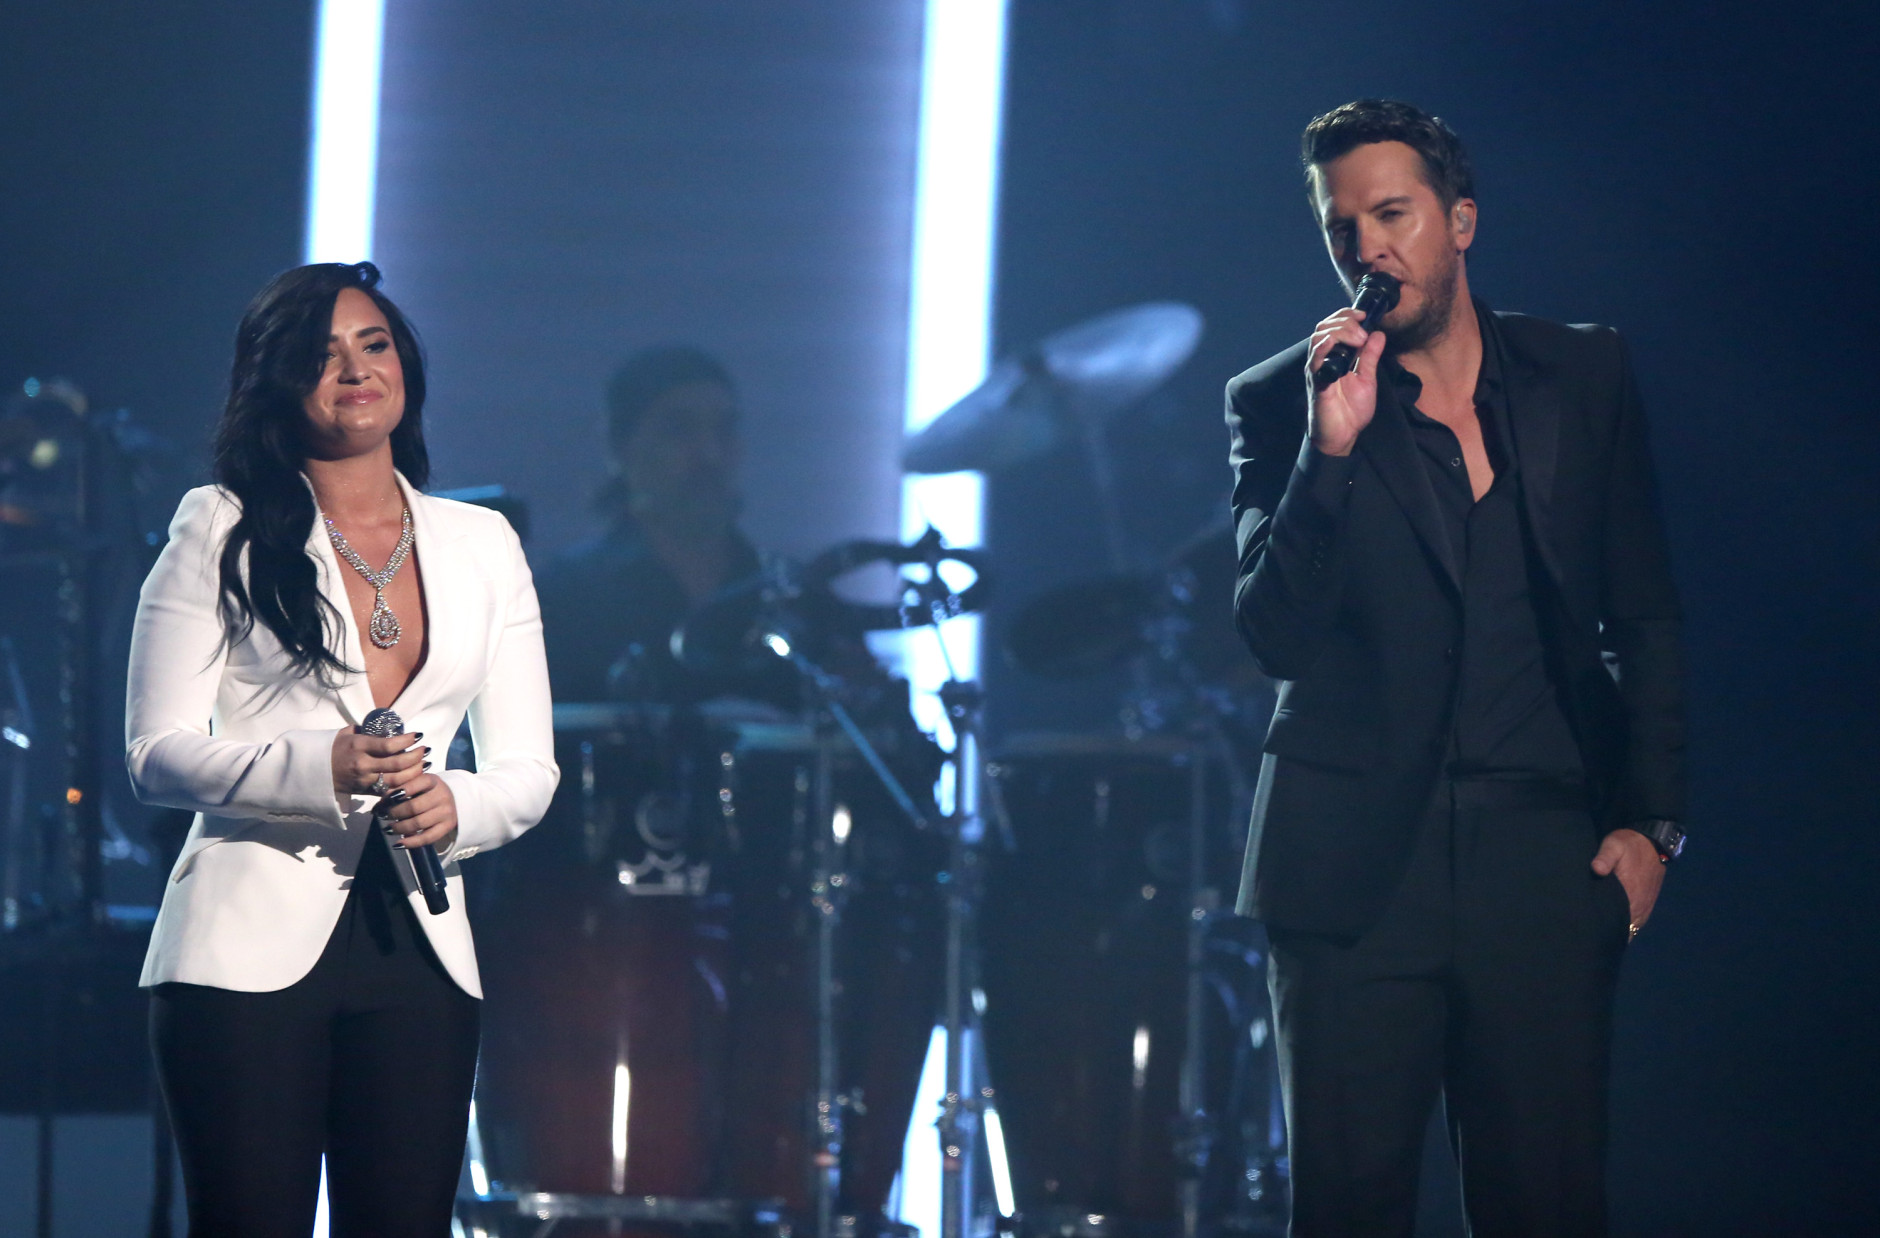 Demi Lovato, left, and Luke Bryan perform "Penny Lover" for a tribute to MusiCares Person of the Year honoree Lionel Richie at the 58th annual Grammy Awards on Monday, Feb. 15, 2016, in Los Angeles. (Photo by Matt Sayles/Invision/AP)